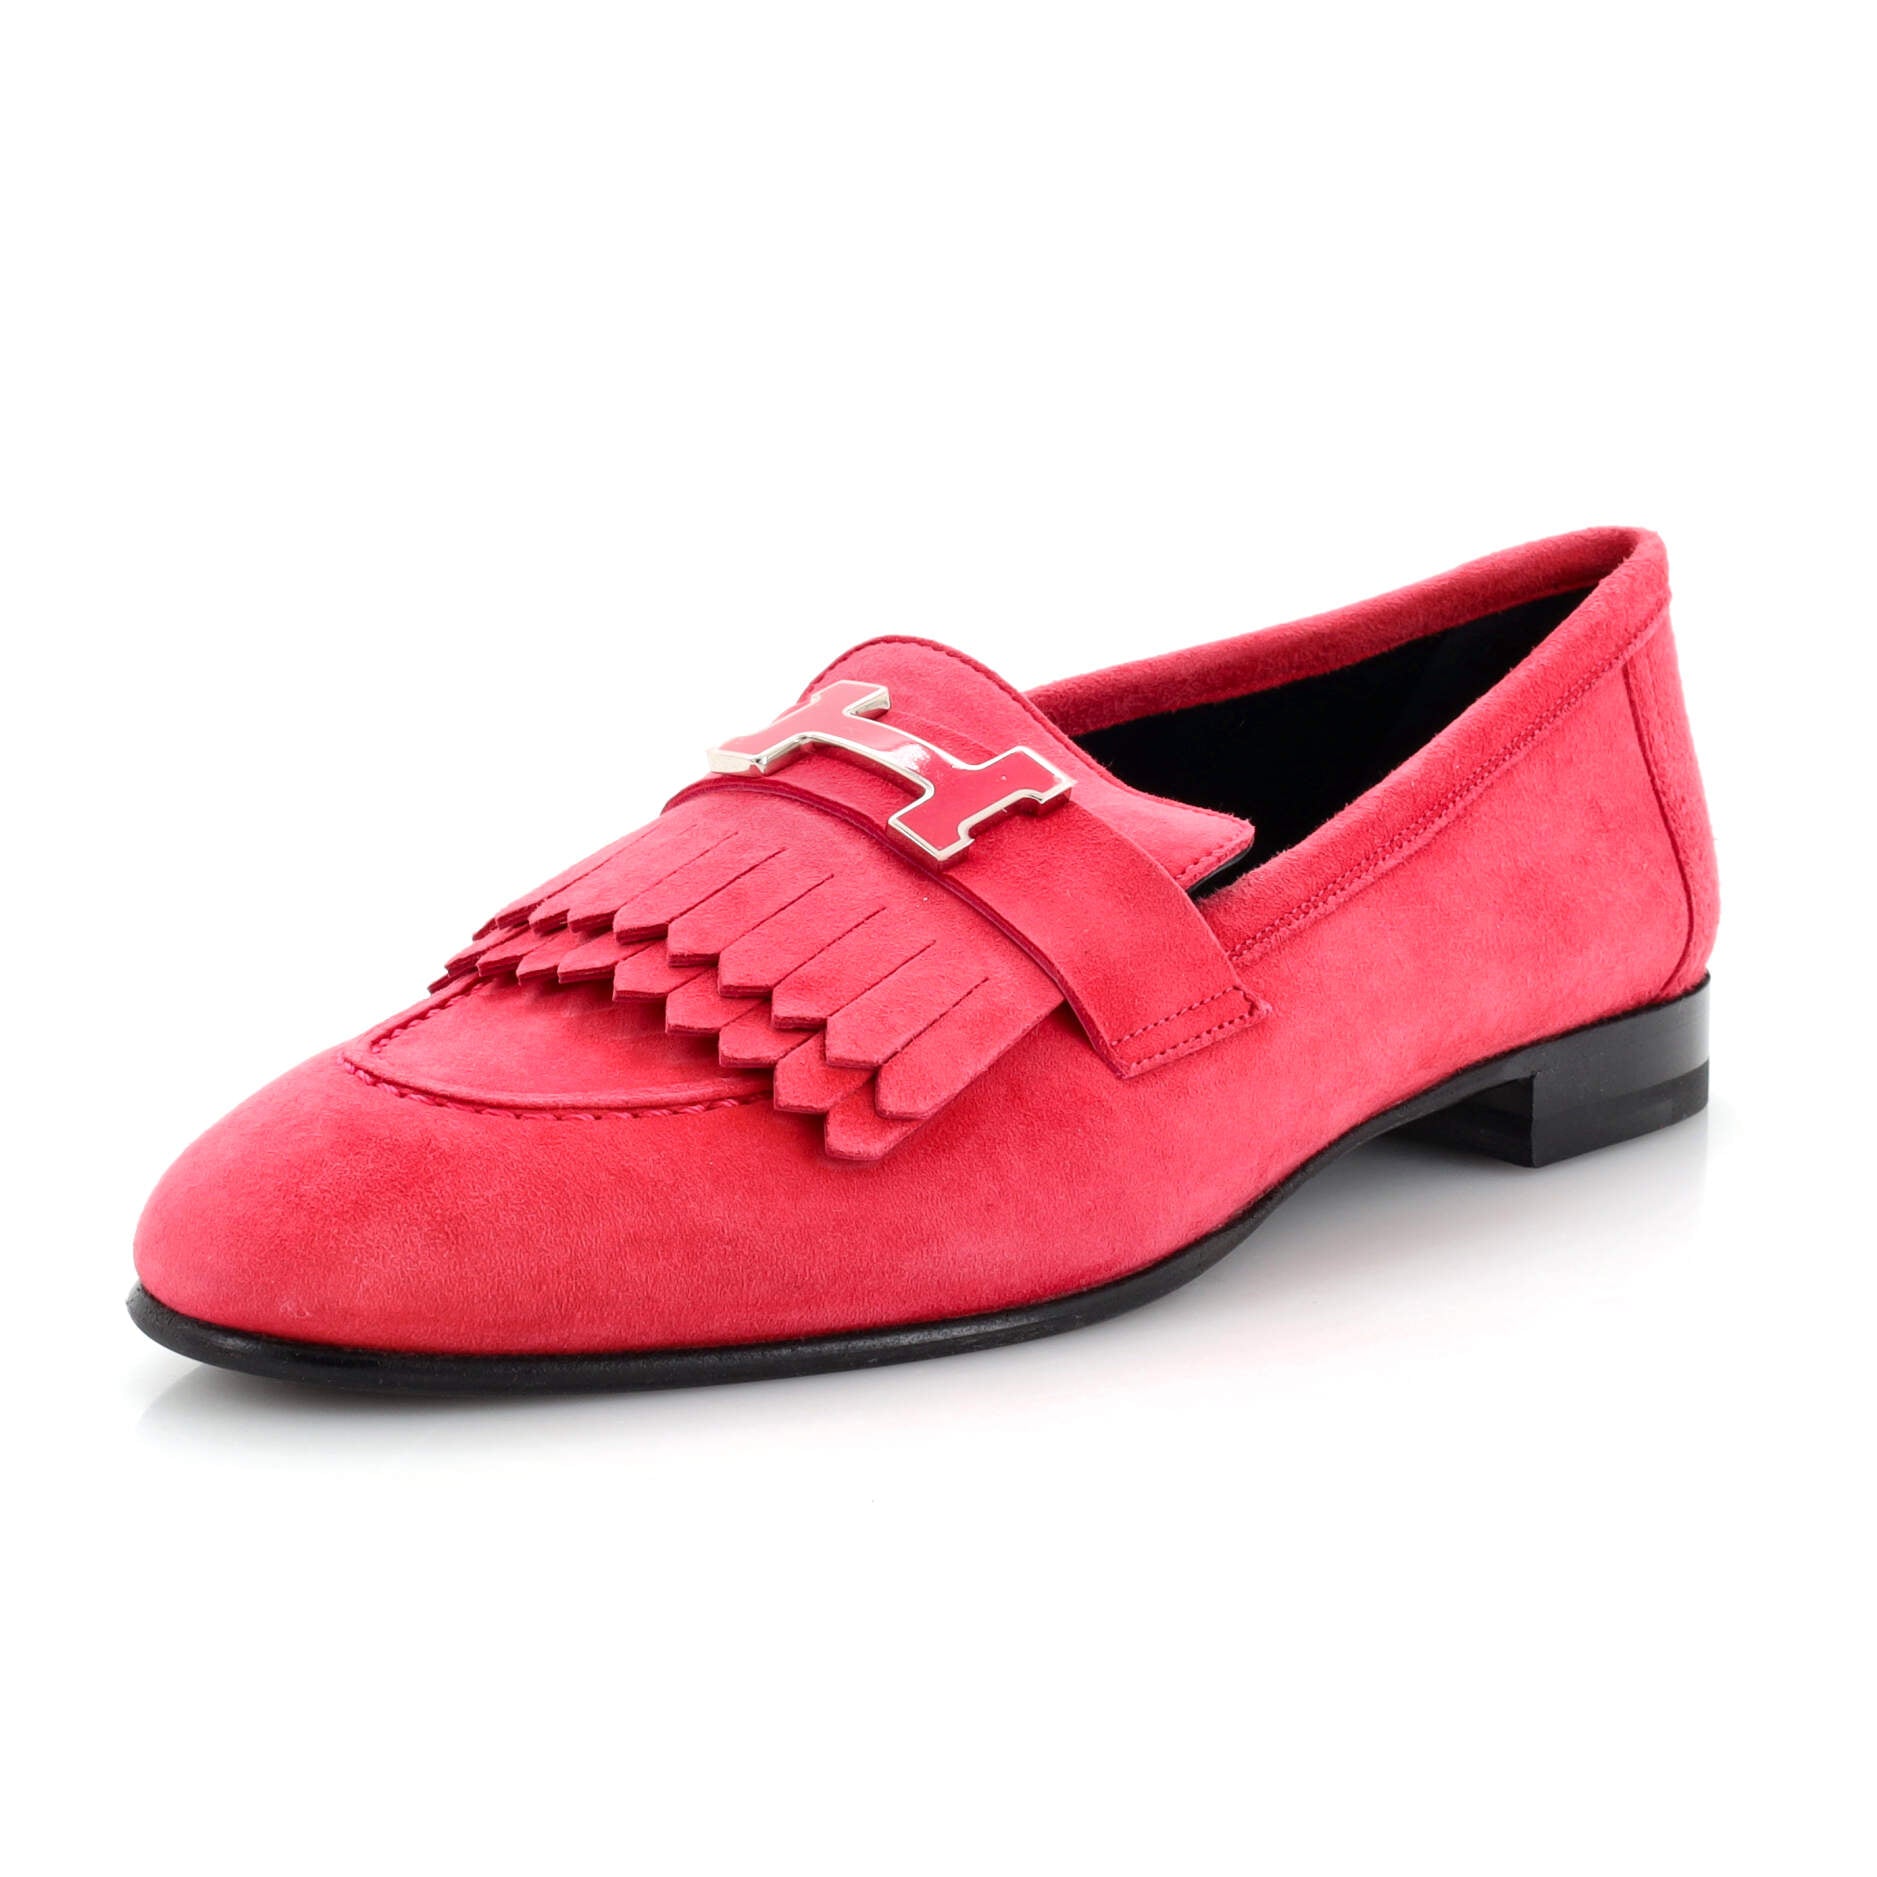 Women's Royal Loafers Suede